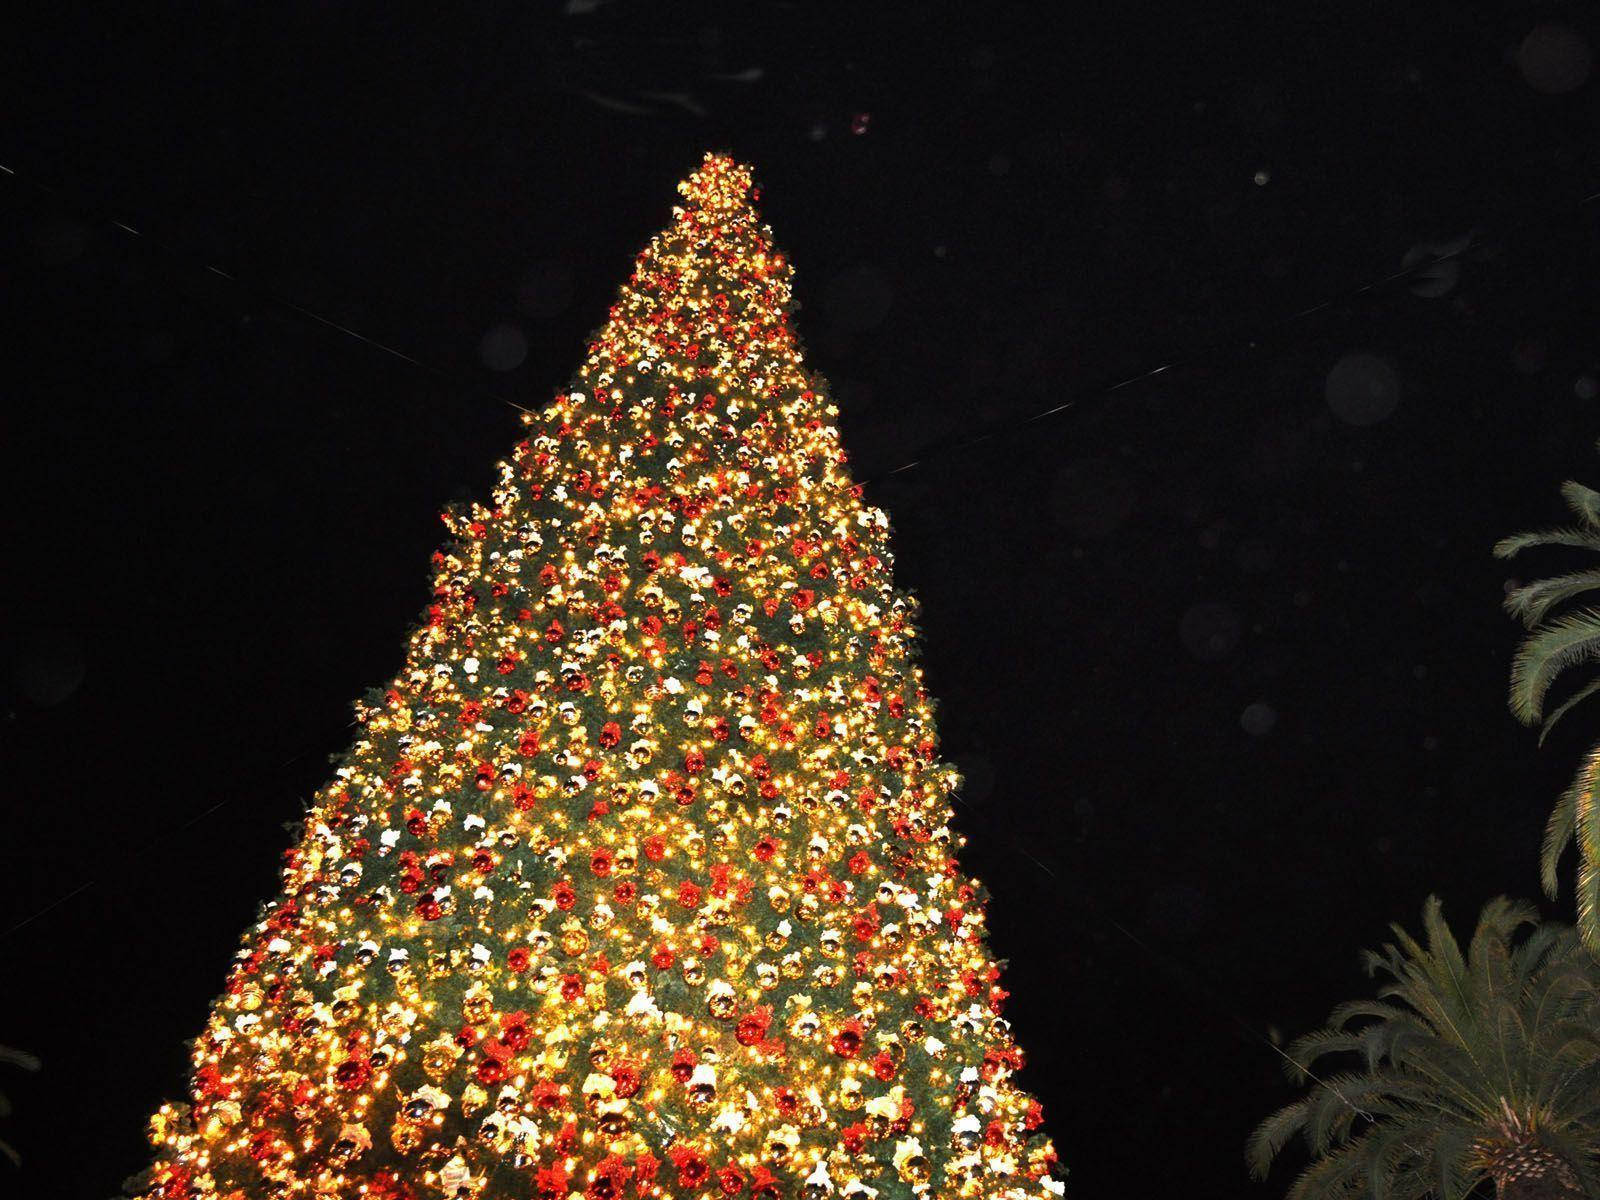 Giant Christmas Tree With Pretty Lights